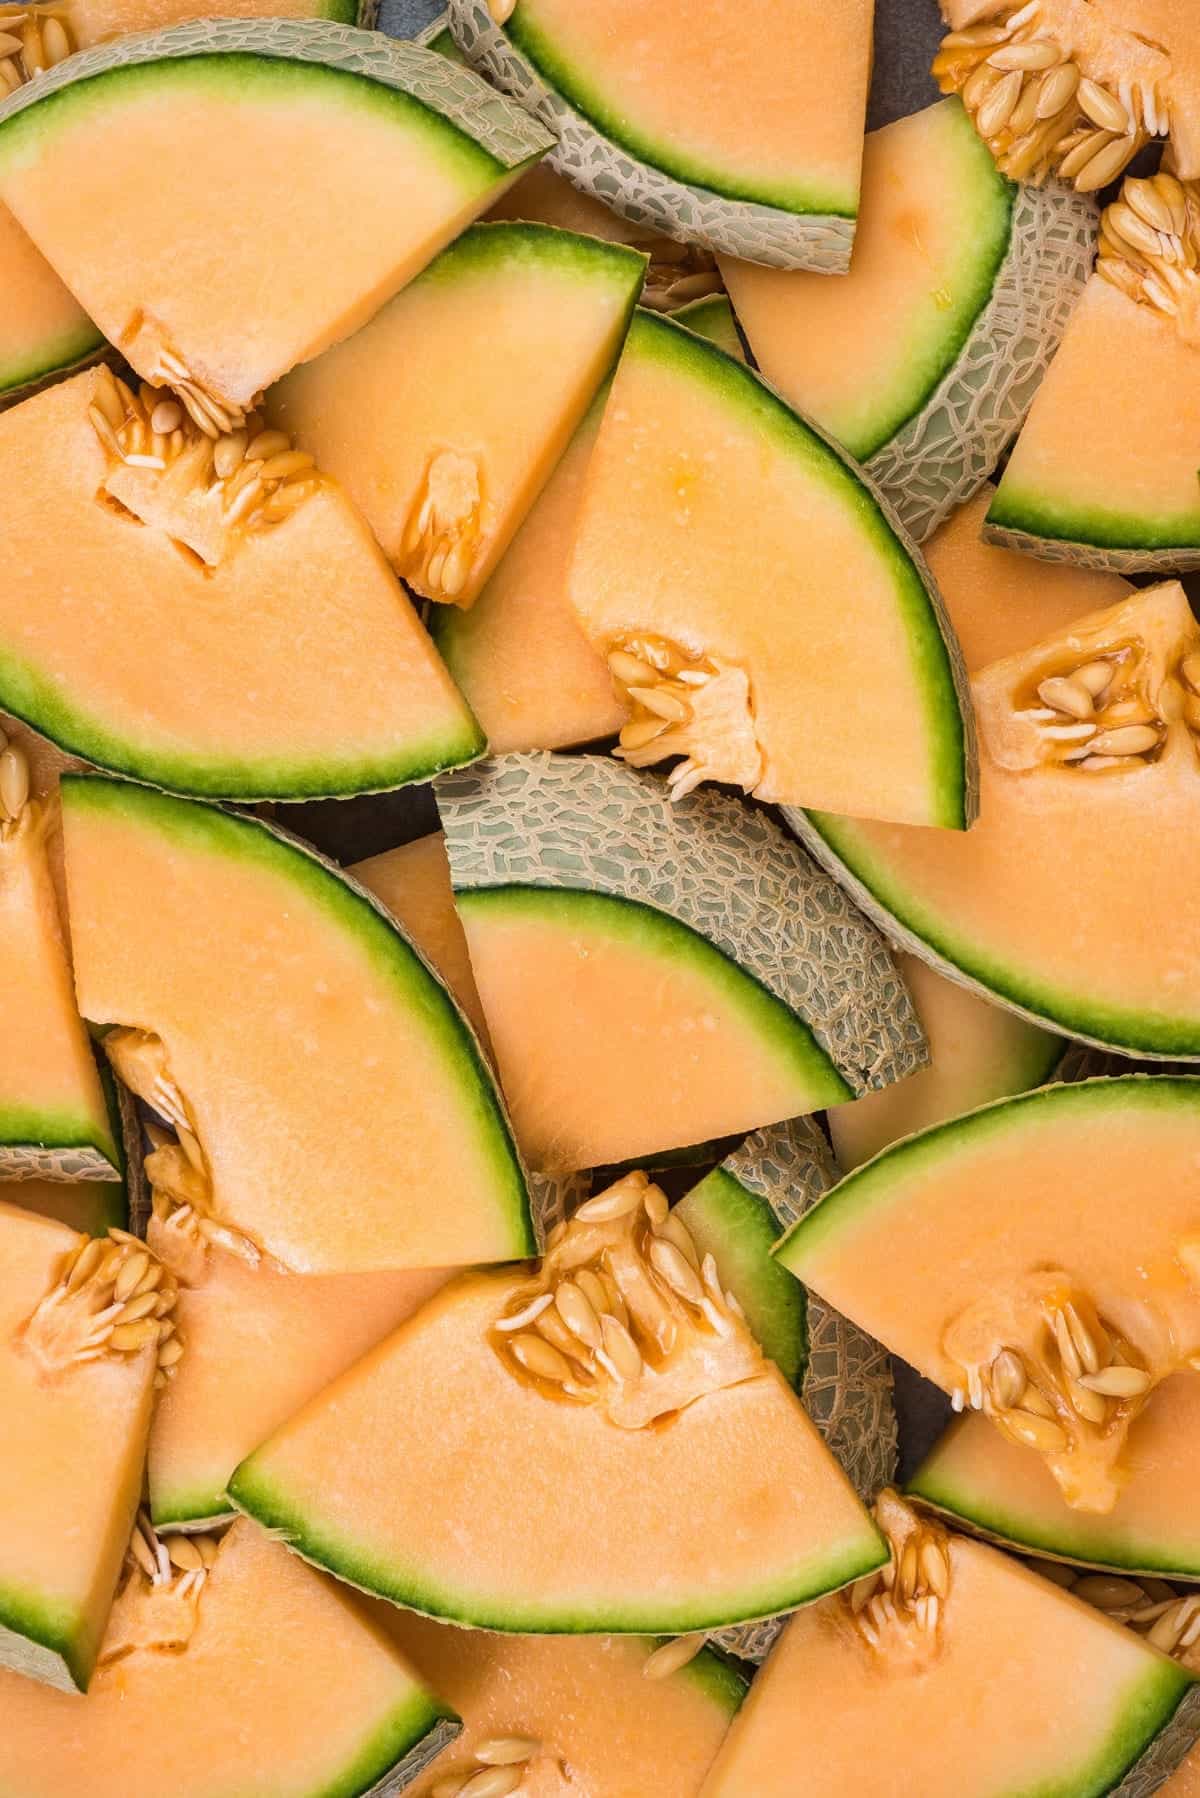 Overhead of cantaloupe circles sliced into quarters and lying flat in a colorful jumble.